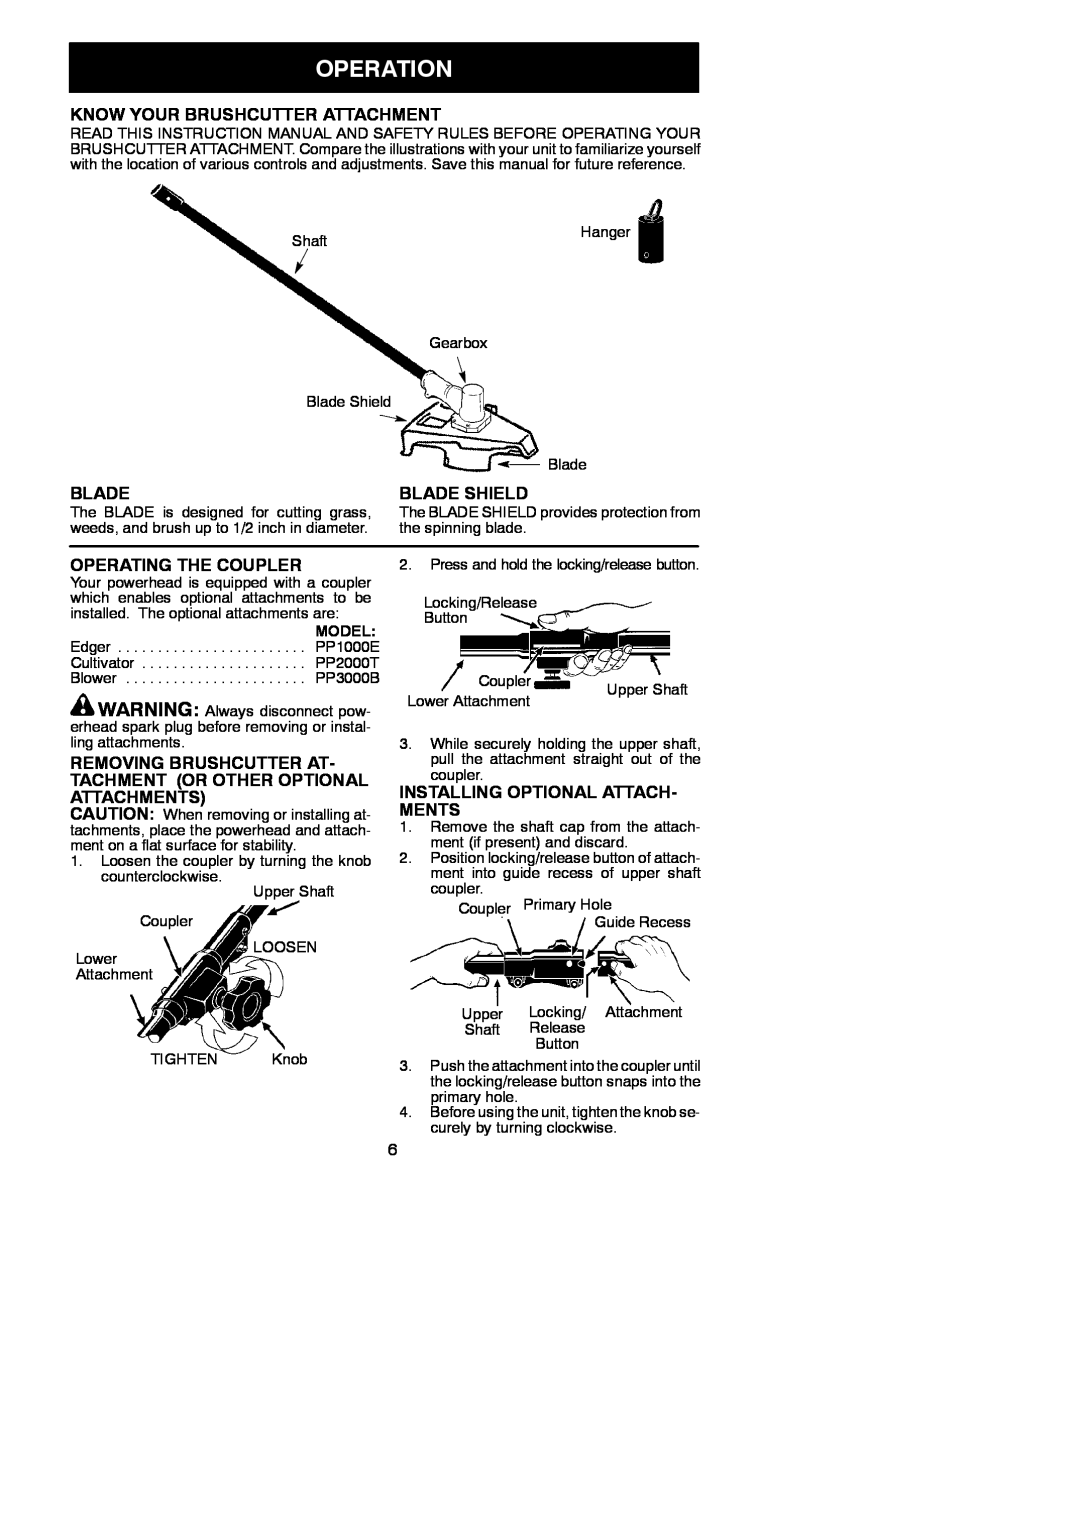 Poulan 530164830 Operation, Know Your Brushcutter Attachment, Blade Shield, Operating The Coupler, Attachments, Ments 